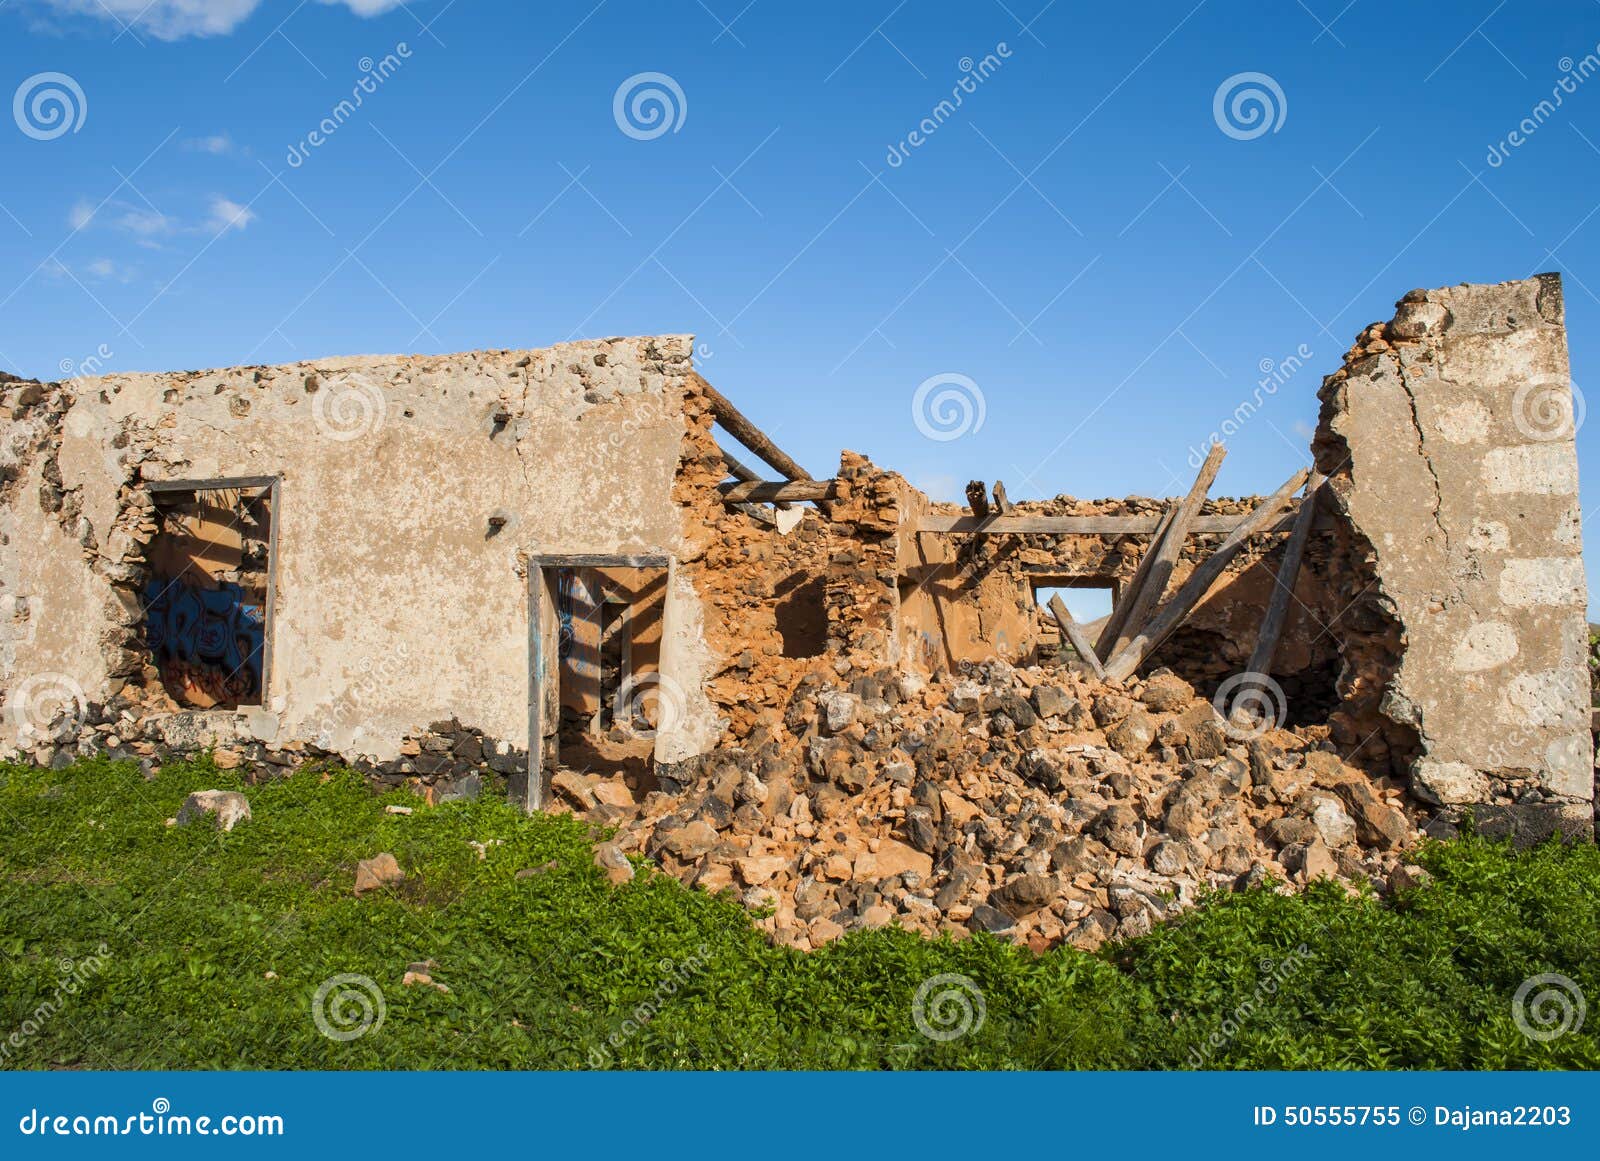 Destroyed Houses after Earthquake Stock Image - Image of broken, blue ...